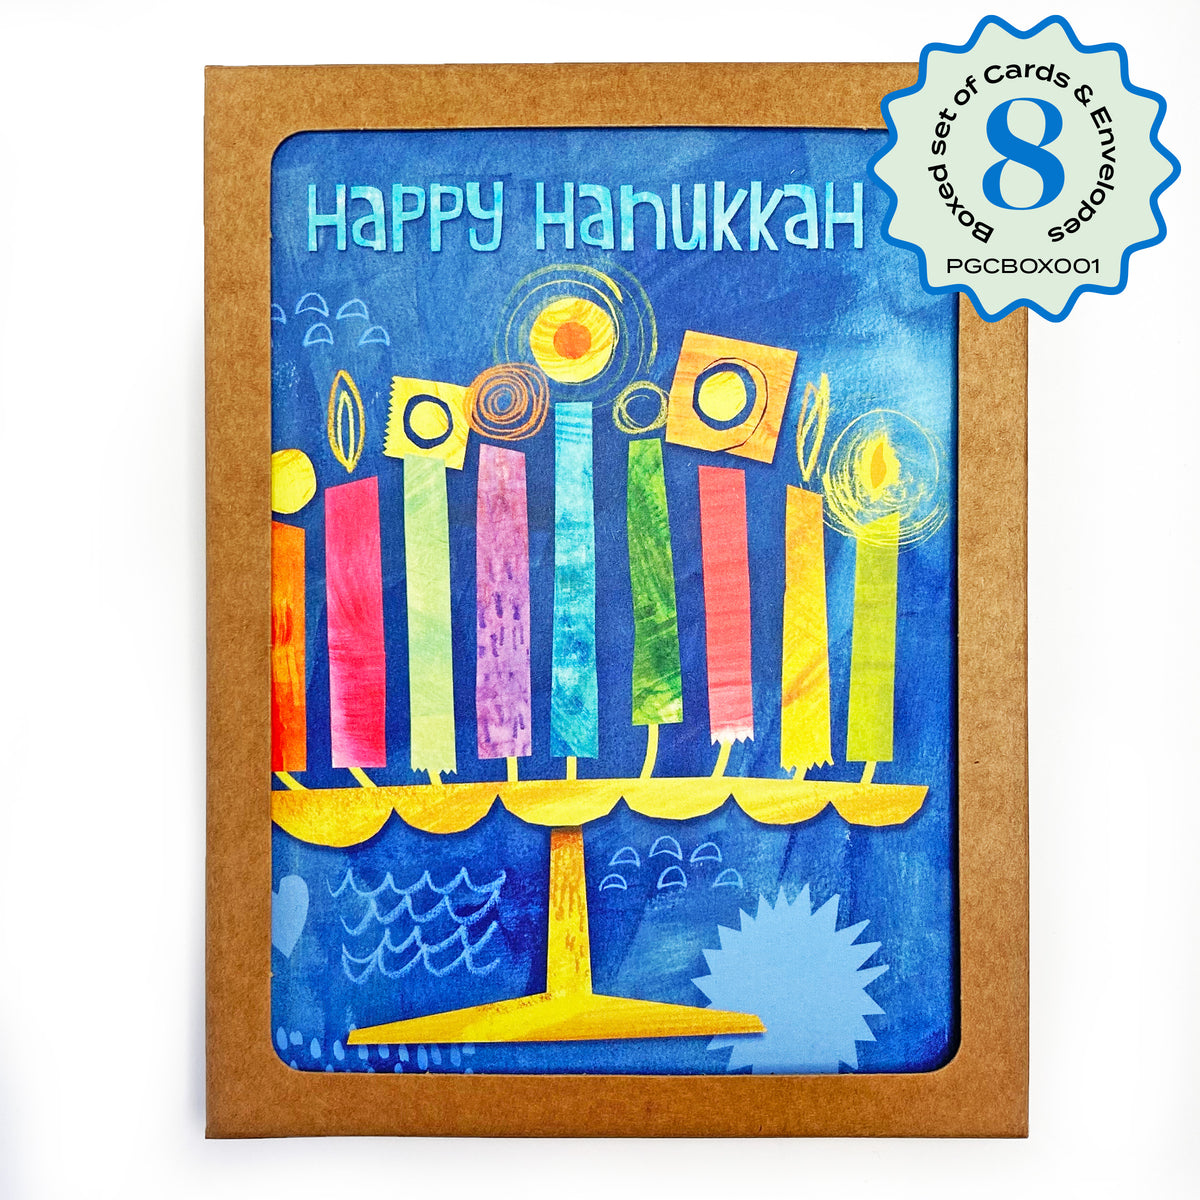 Boxed Set of 8 Cards-Happy Hanukkah Greeting Cards